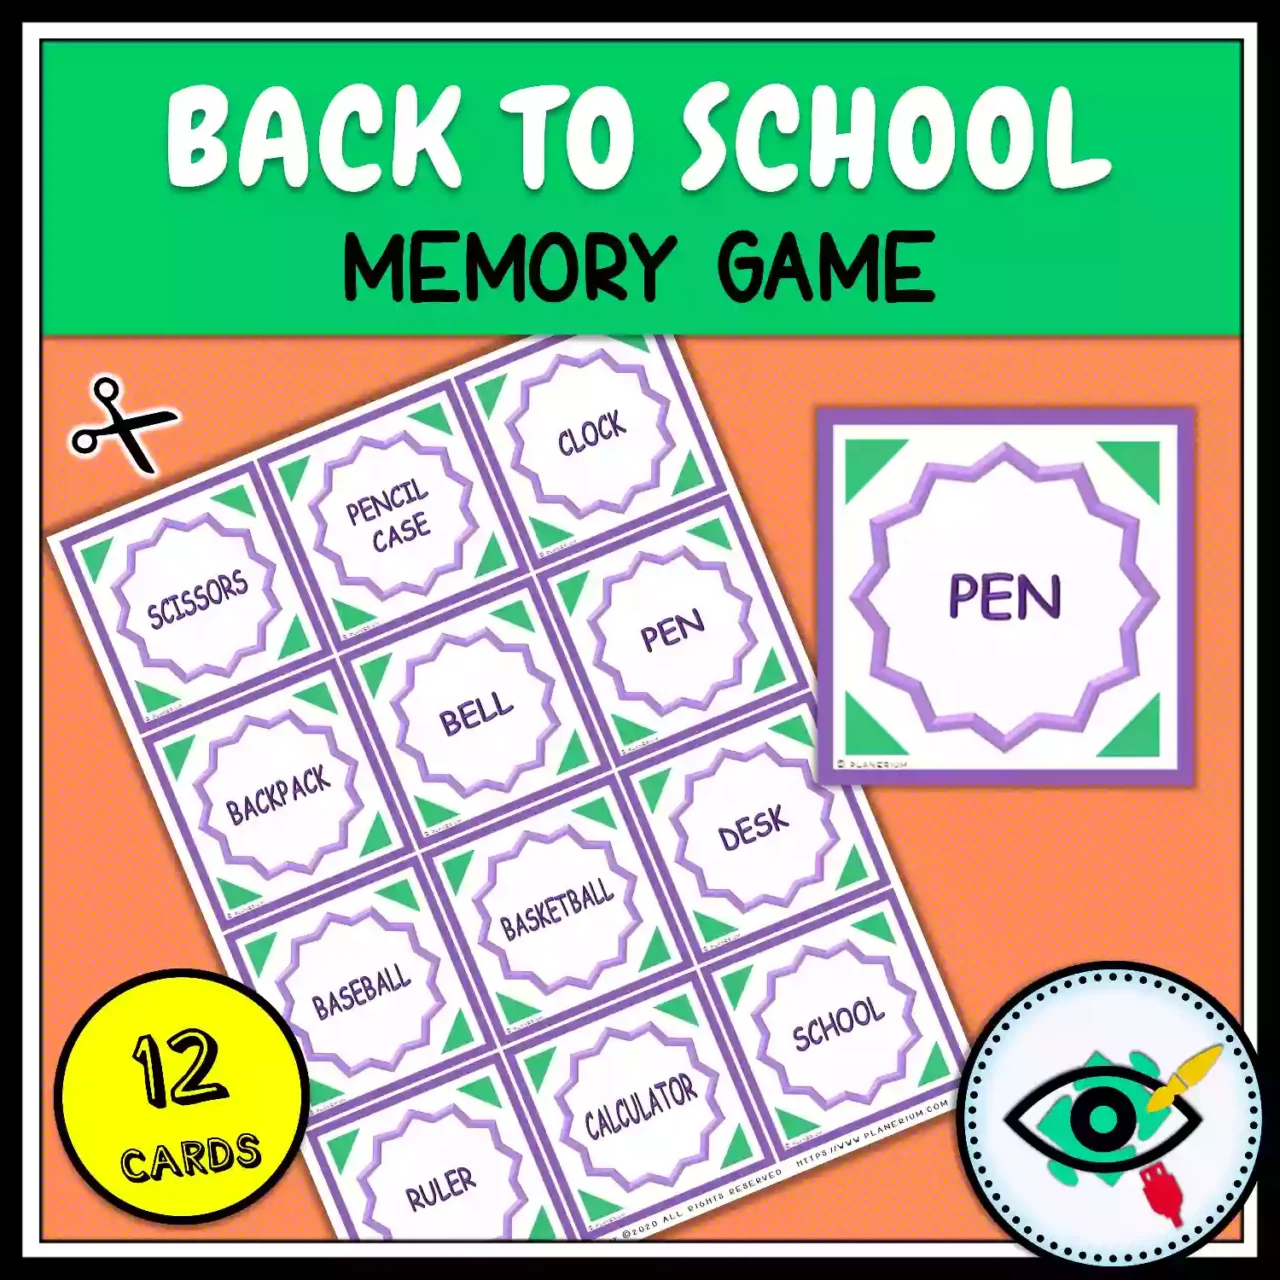 Back to School Memory Game - Featured 4